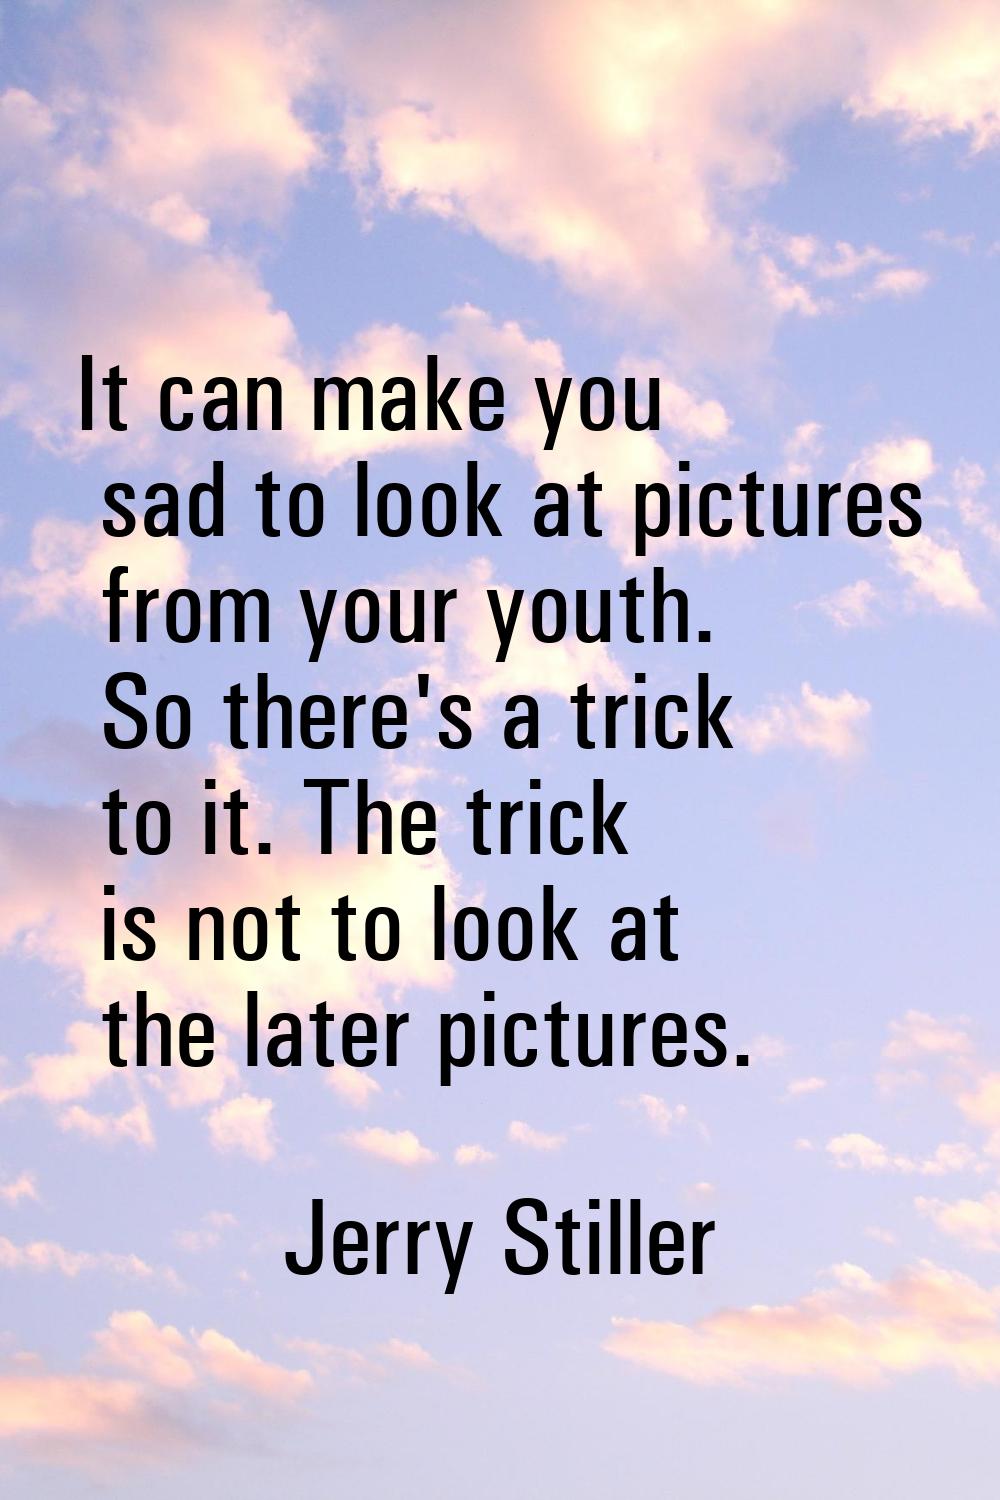 It can make you sad to look at pictures from your youth. So there's a trick to it. The trick is not